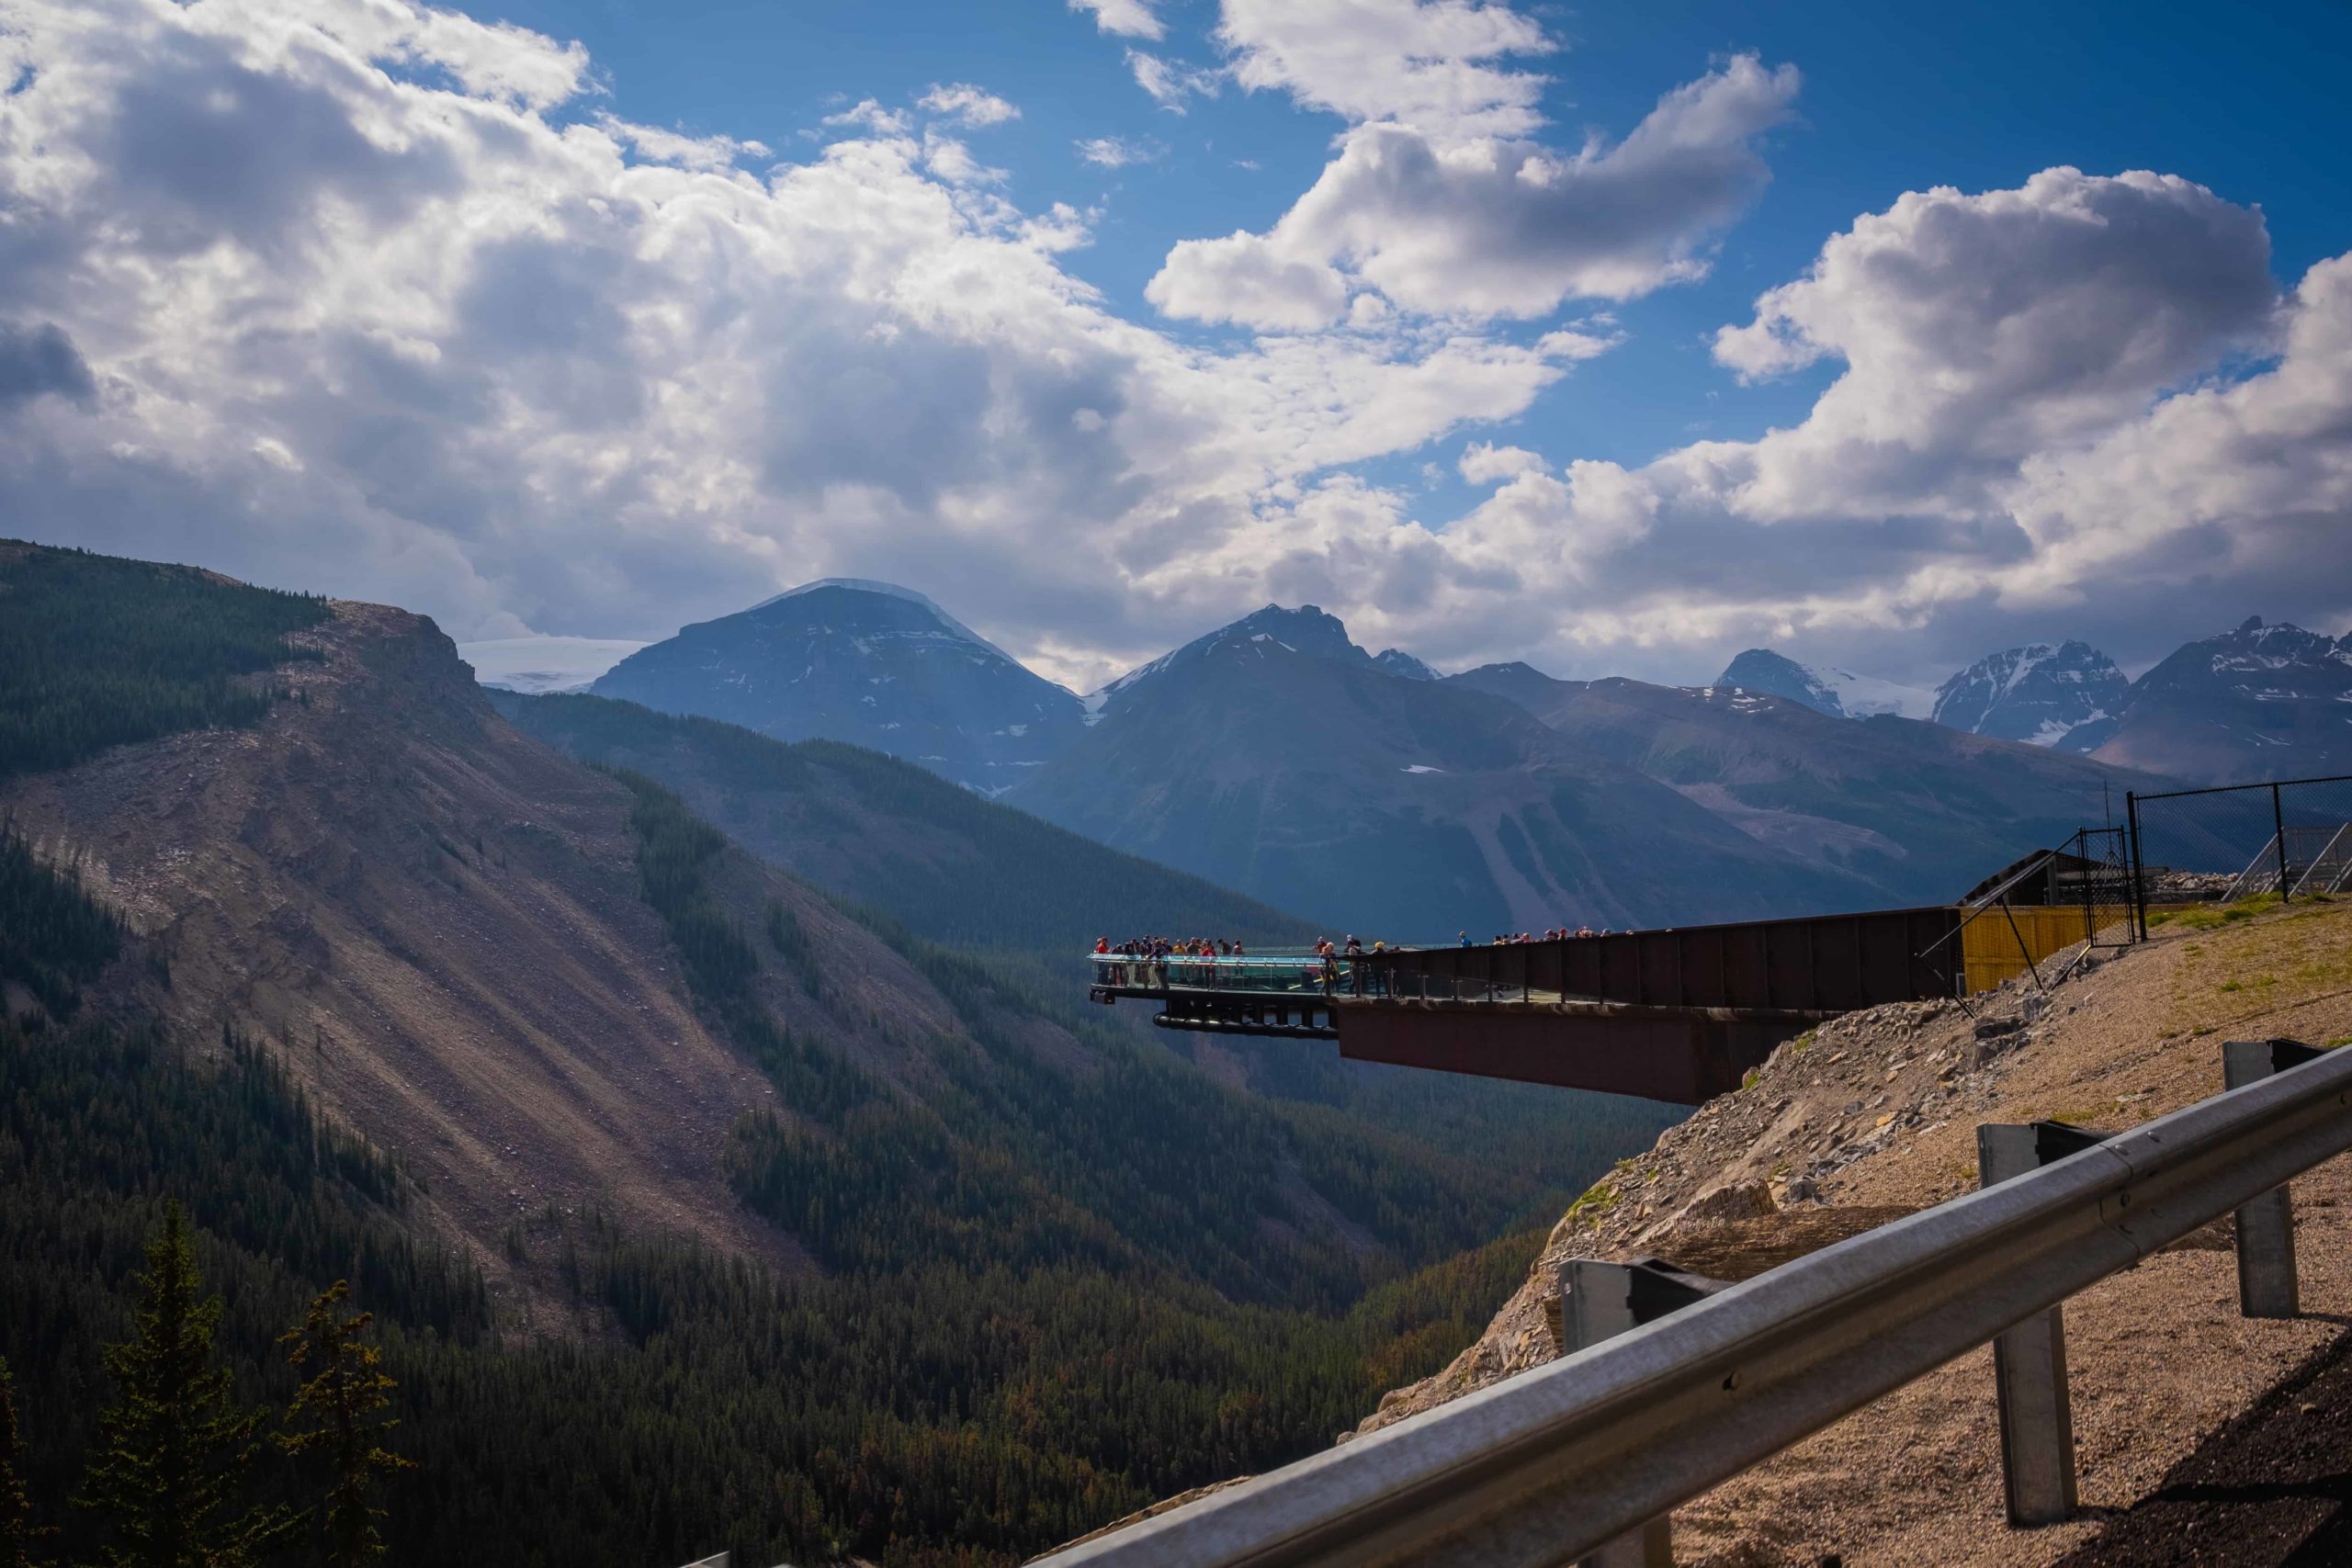 Columbia Icefield Skywalk from the road